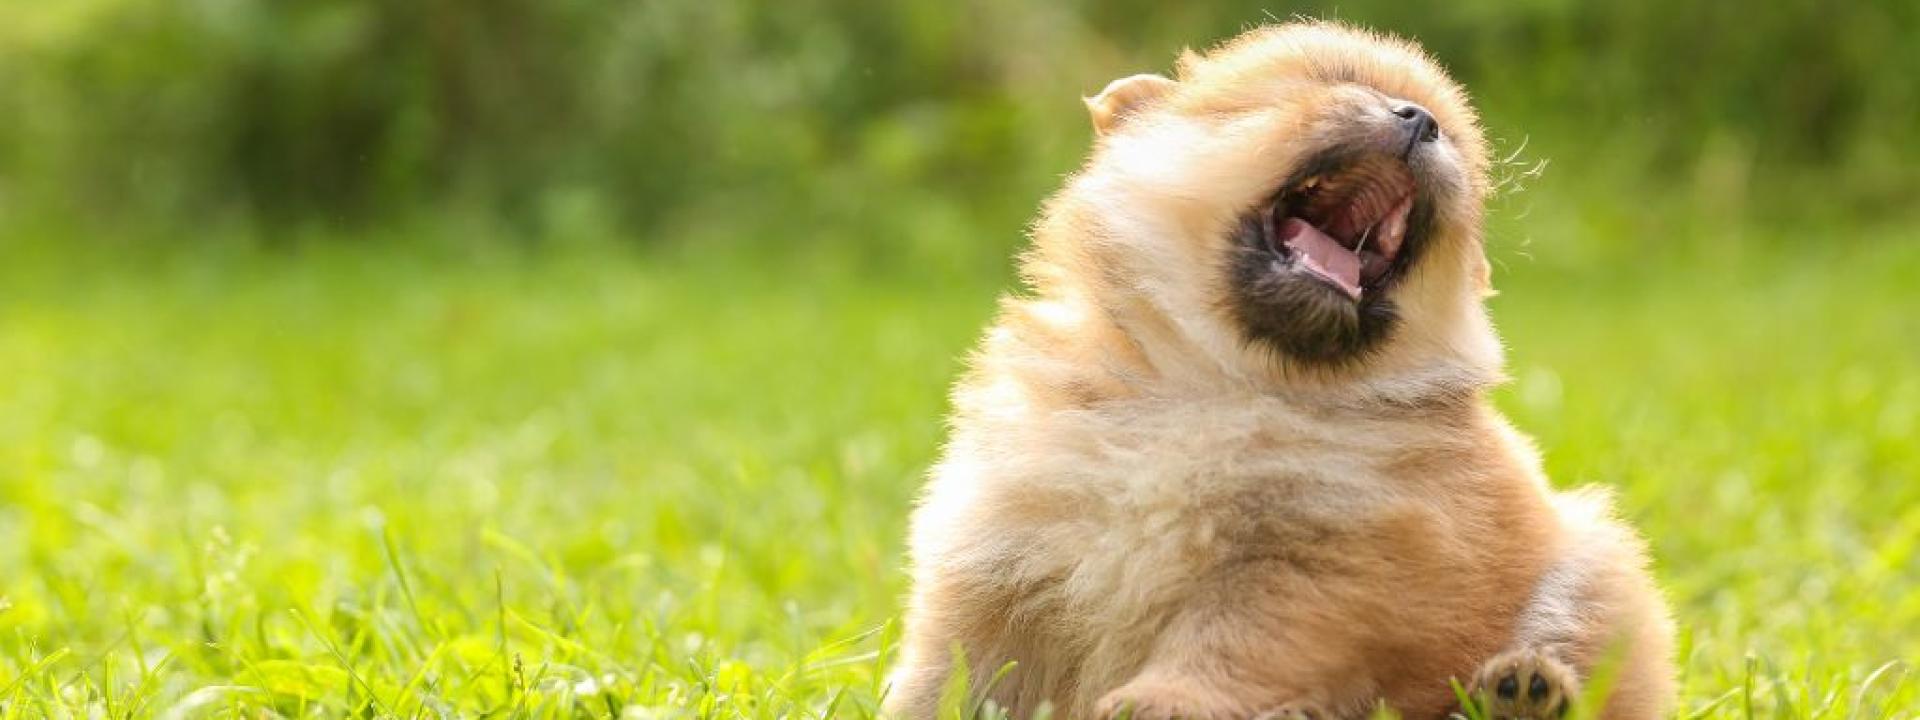 Funny puppy preparing to sneeze while sitting in grass